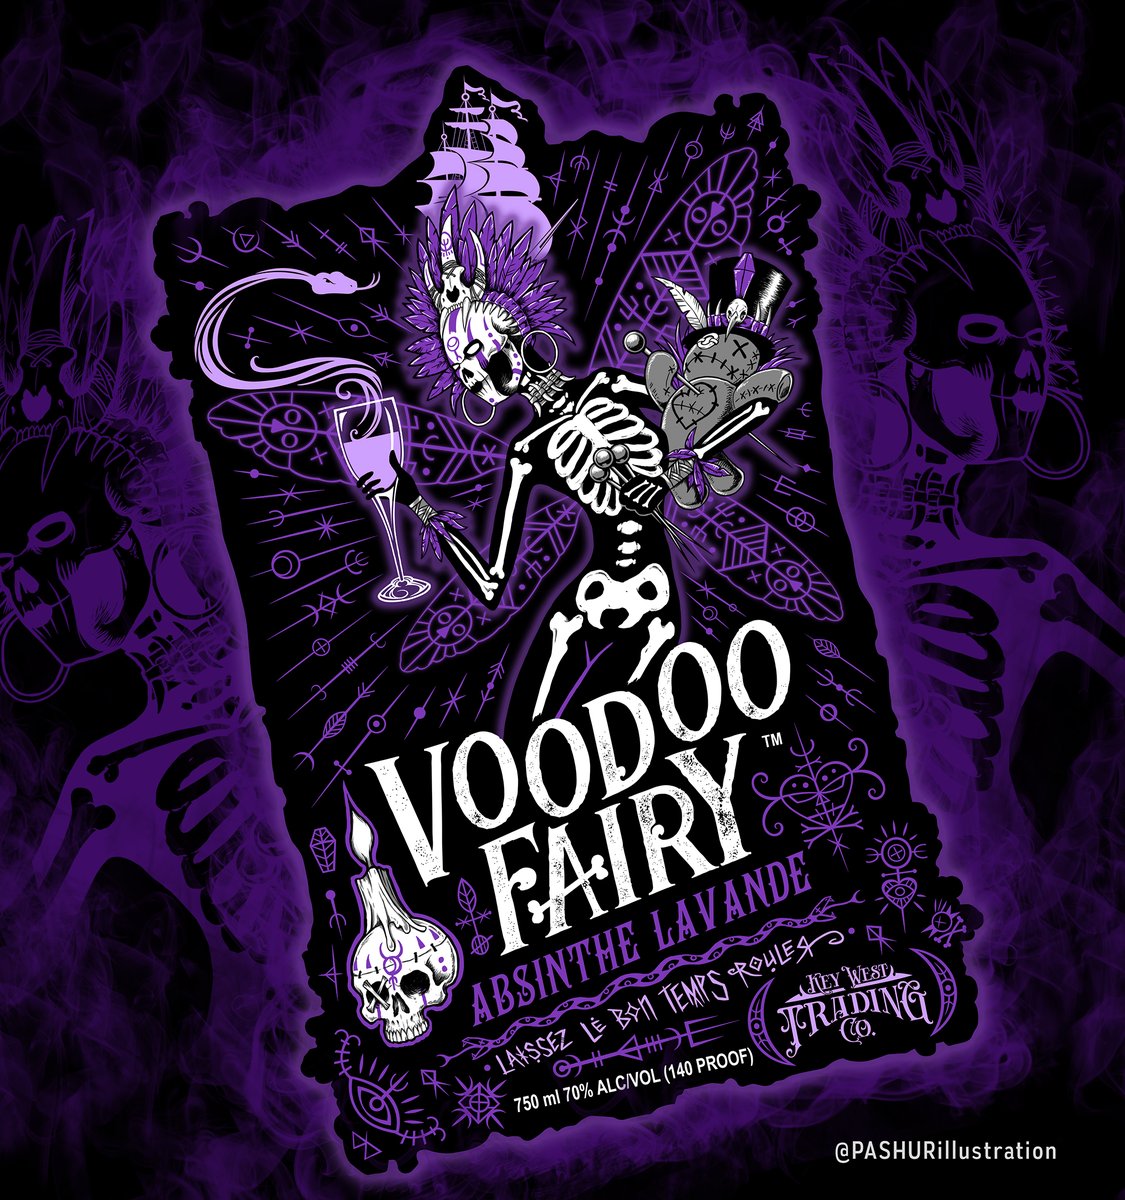 I finally finished the #VOODOOFAIRY #absinthe label #illustration for #KeyWest Trading Co. Can't wait to see this on the bottle all tricked out by All American Label. #voodoo #voodoovenom #voodooart #voodooillustration #art #artist #packagedesign